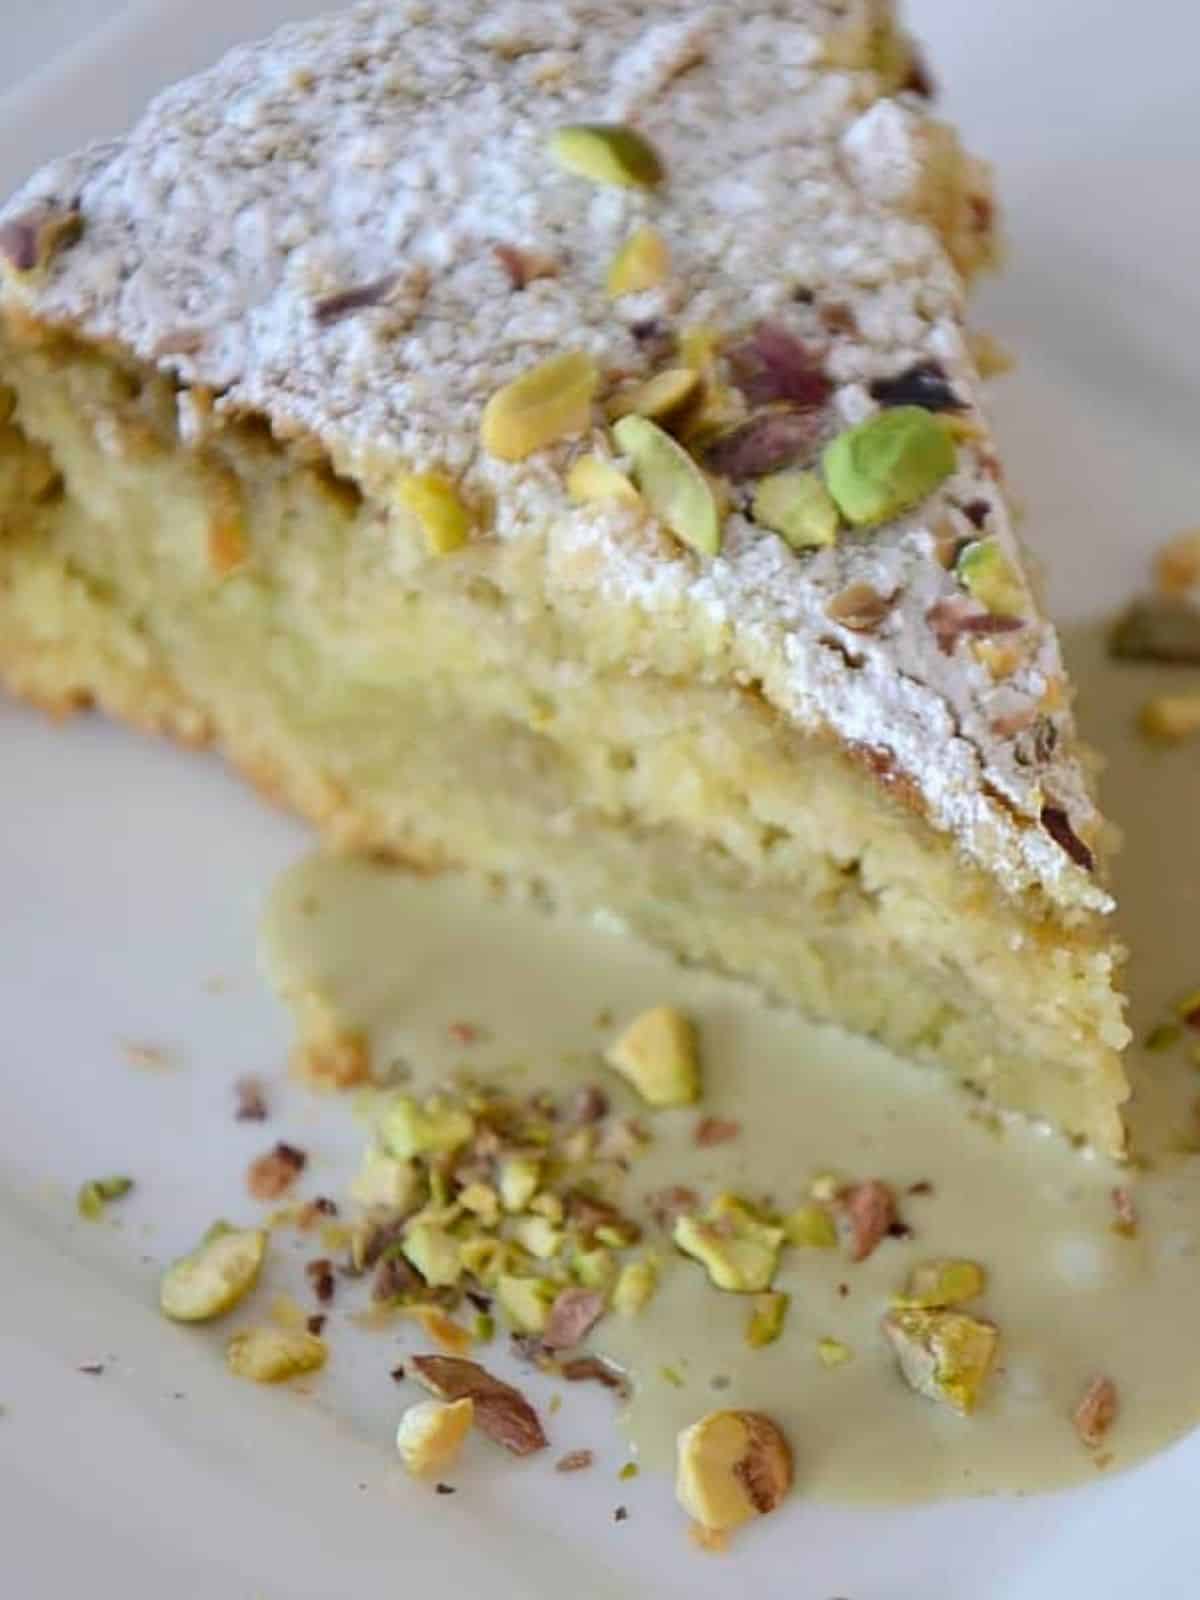 a delectable slice of pistachio cheesecake, topped with chopped pistachios and served on a delicate plate.